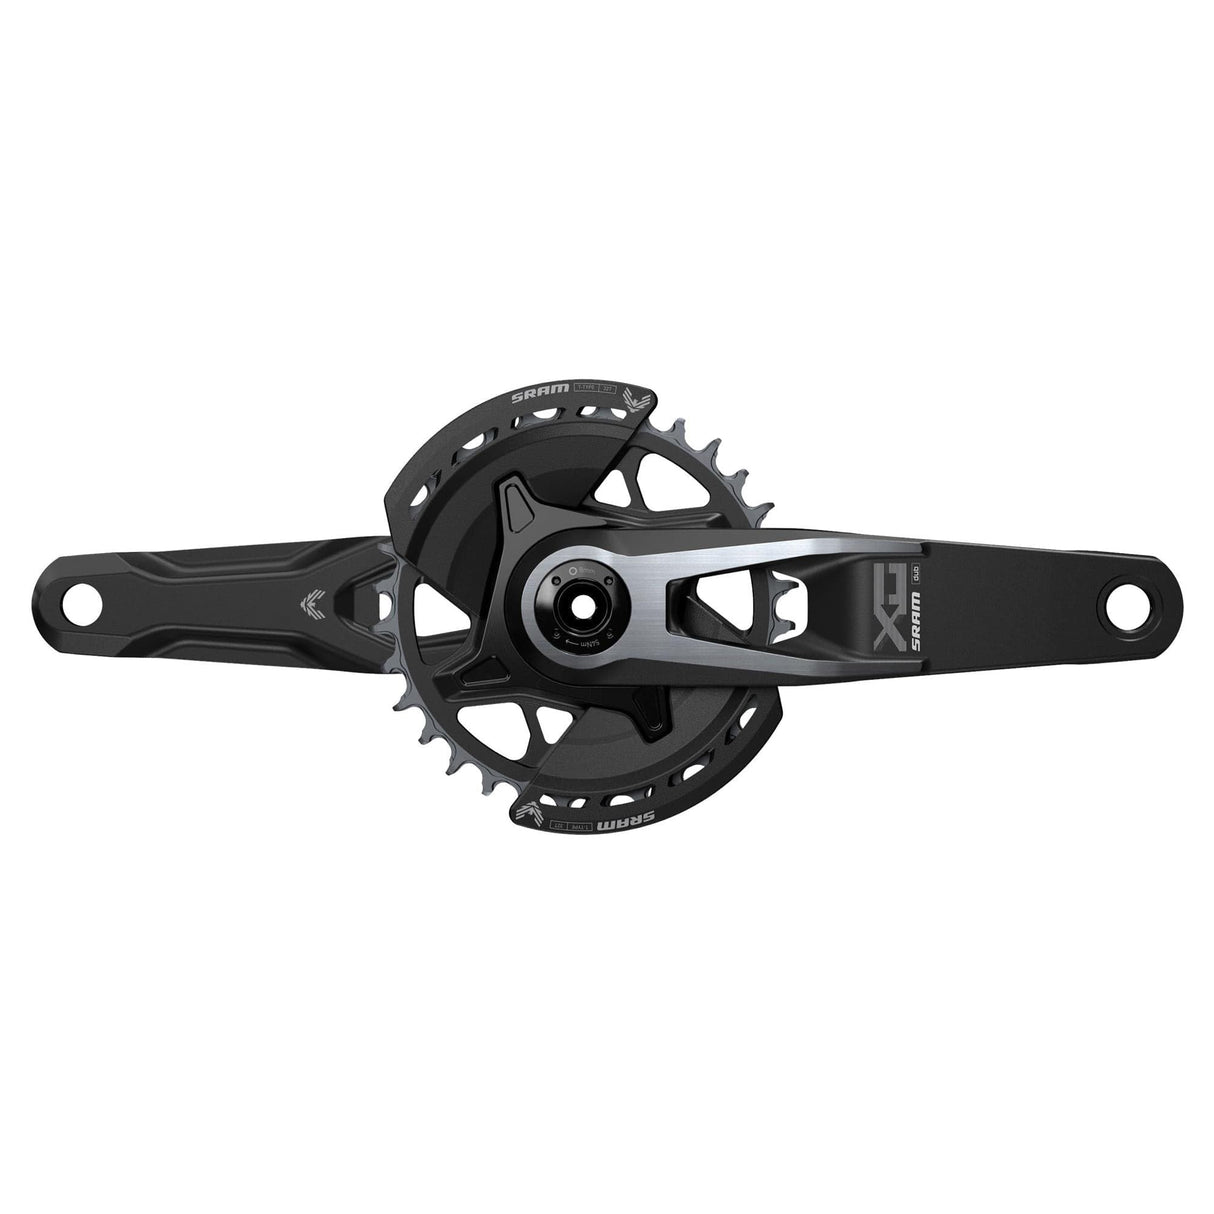 Sram Crankset X0 Eagle Q174 55Mm Chainline Dub Mtb Wide 2-Guards 32T T-Type (Bb & Bb Dub Spacers Are Not Included) V2:  165Mm